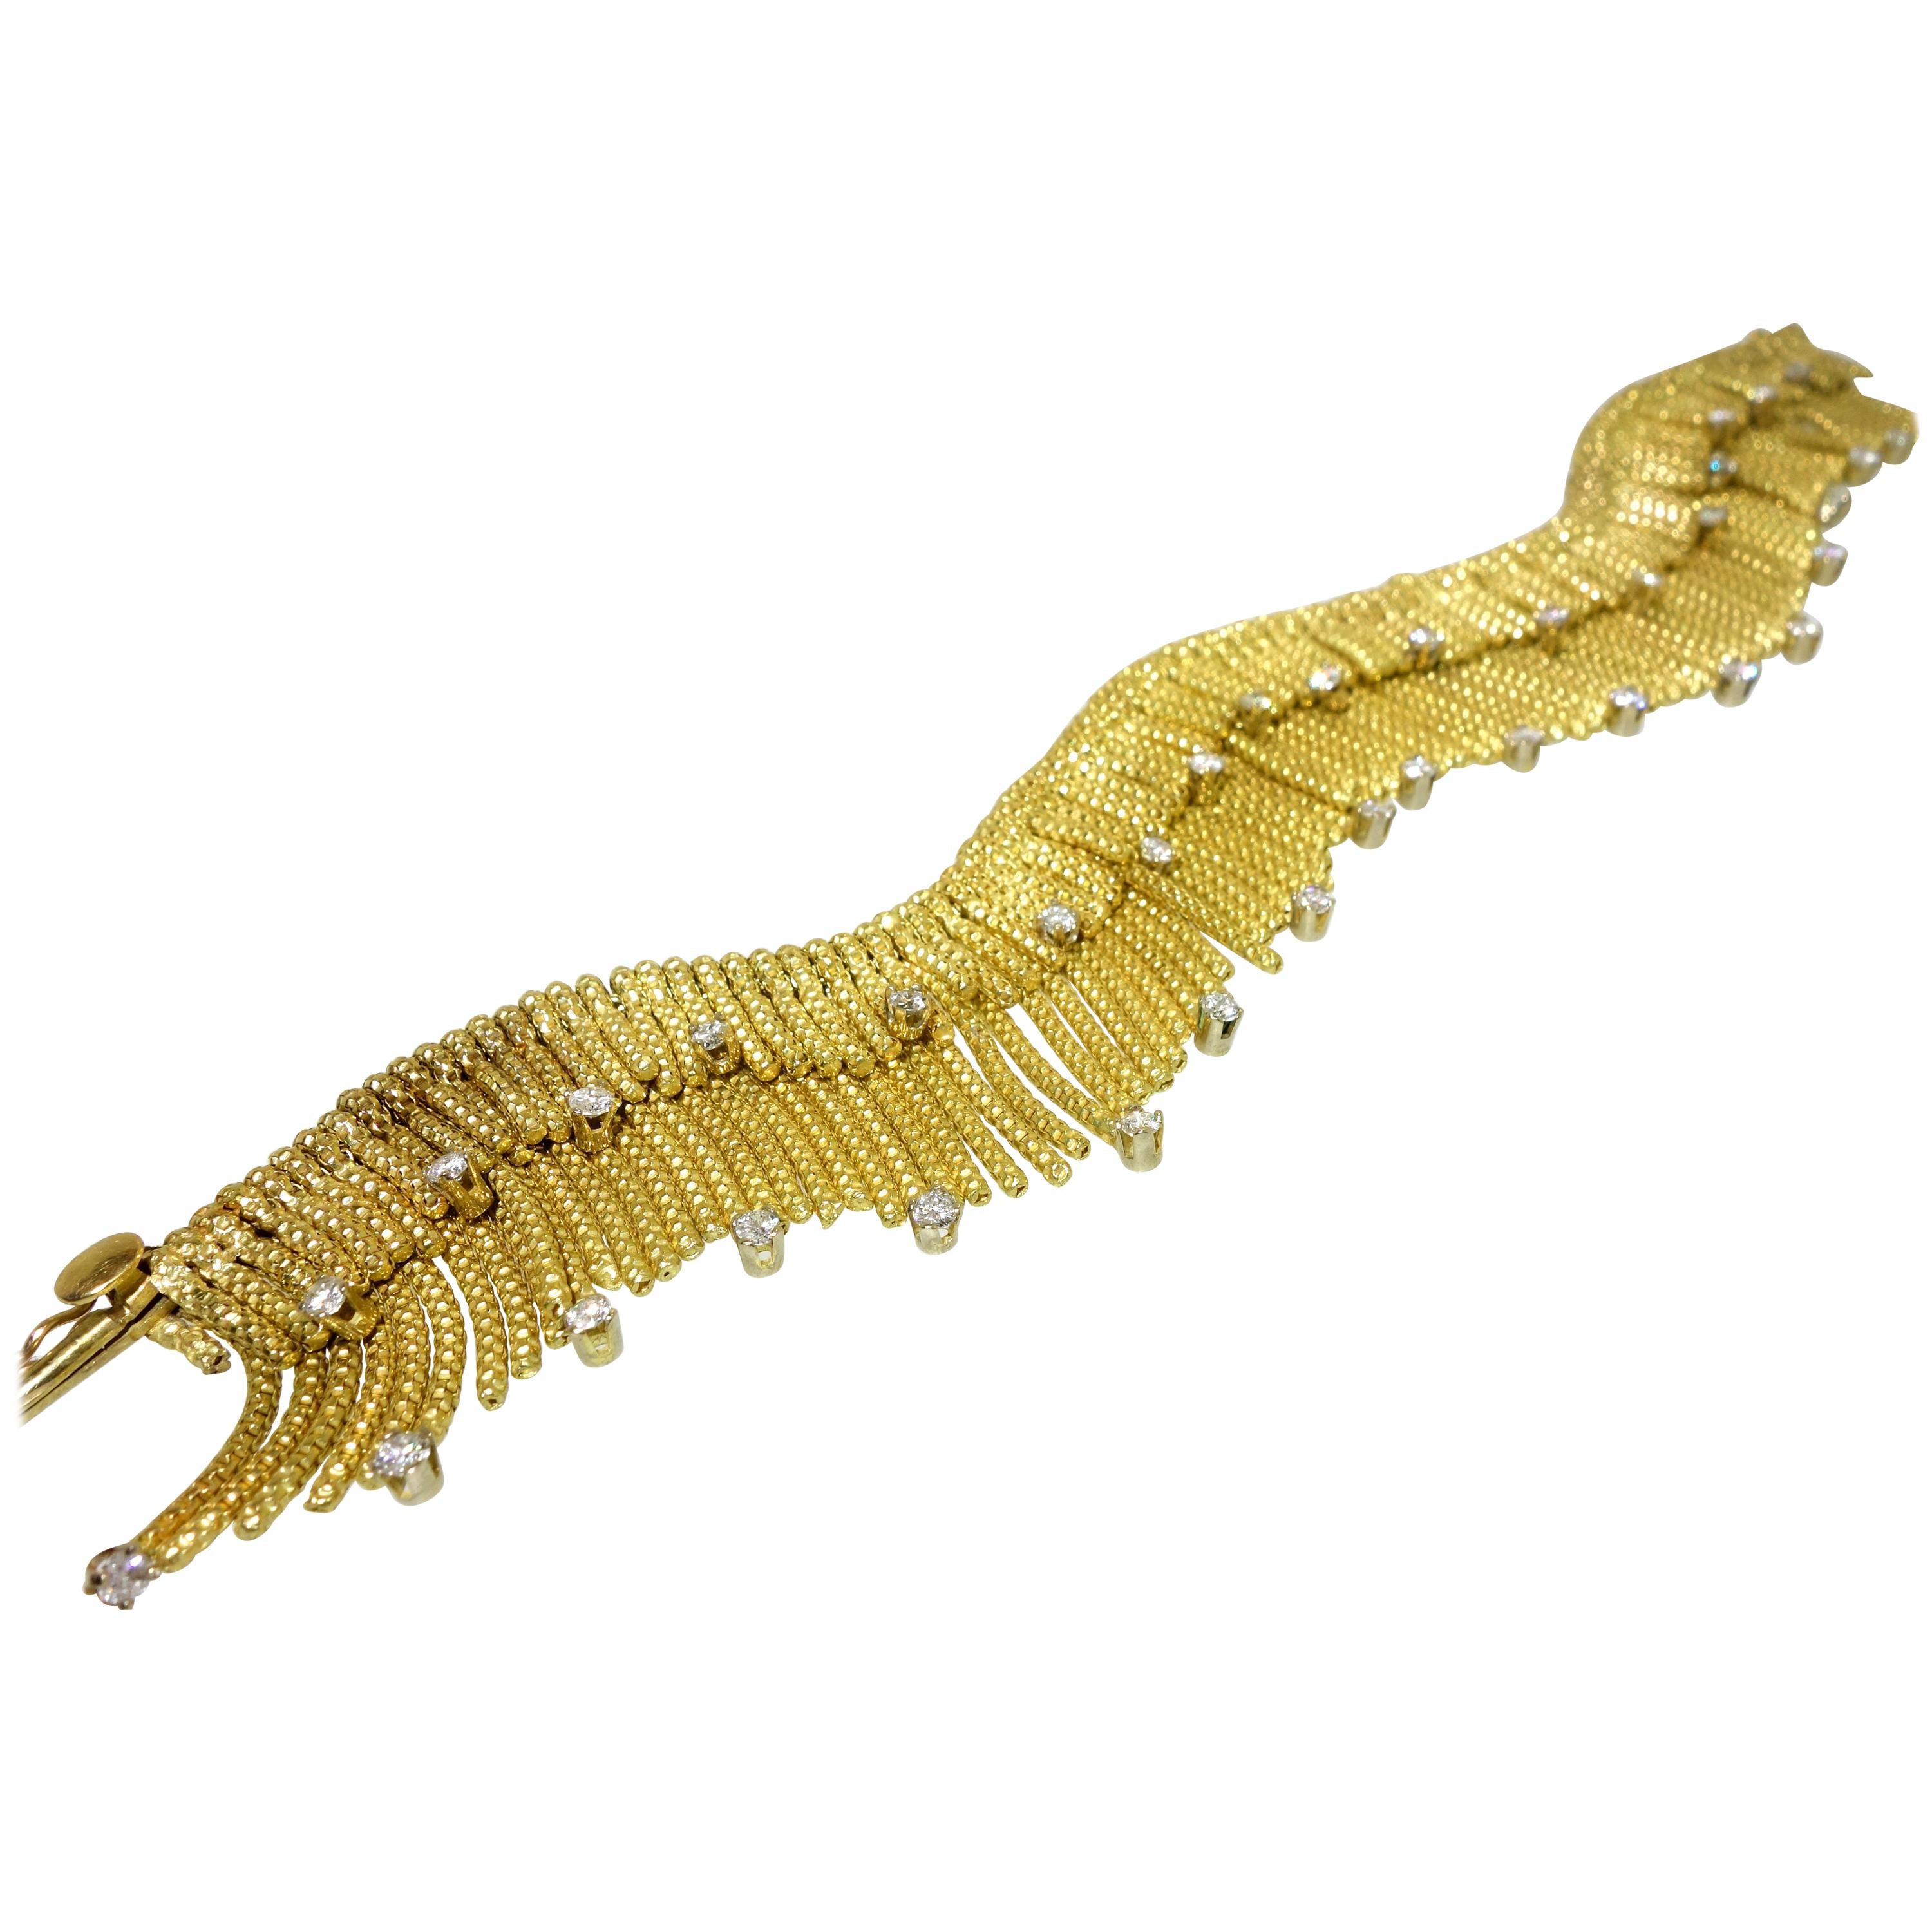 Retro design 18K and diamond fringe bracelet.  Outrageous in design, this bracelet is a heavy 18K gold long bracelet set with diamonds throughout the fringe.  The bracelet weighs 69.32 grams and is just over 7.5 inches long and 1 inch wide. 